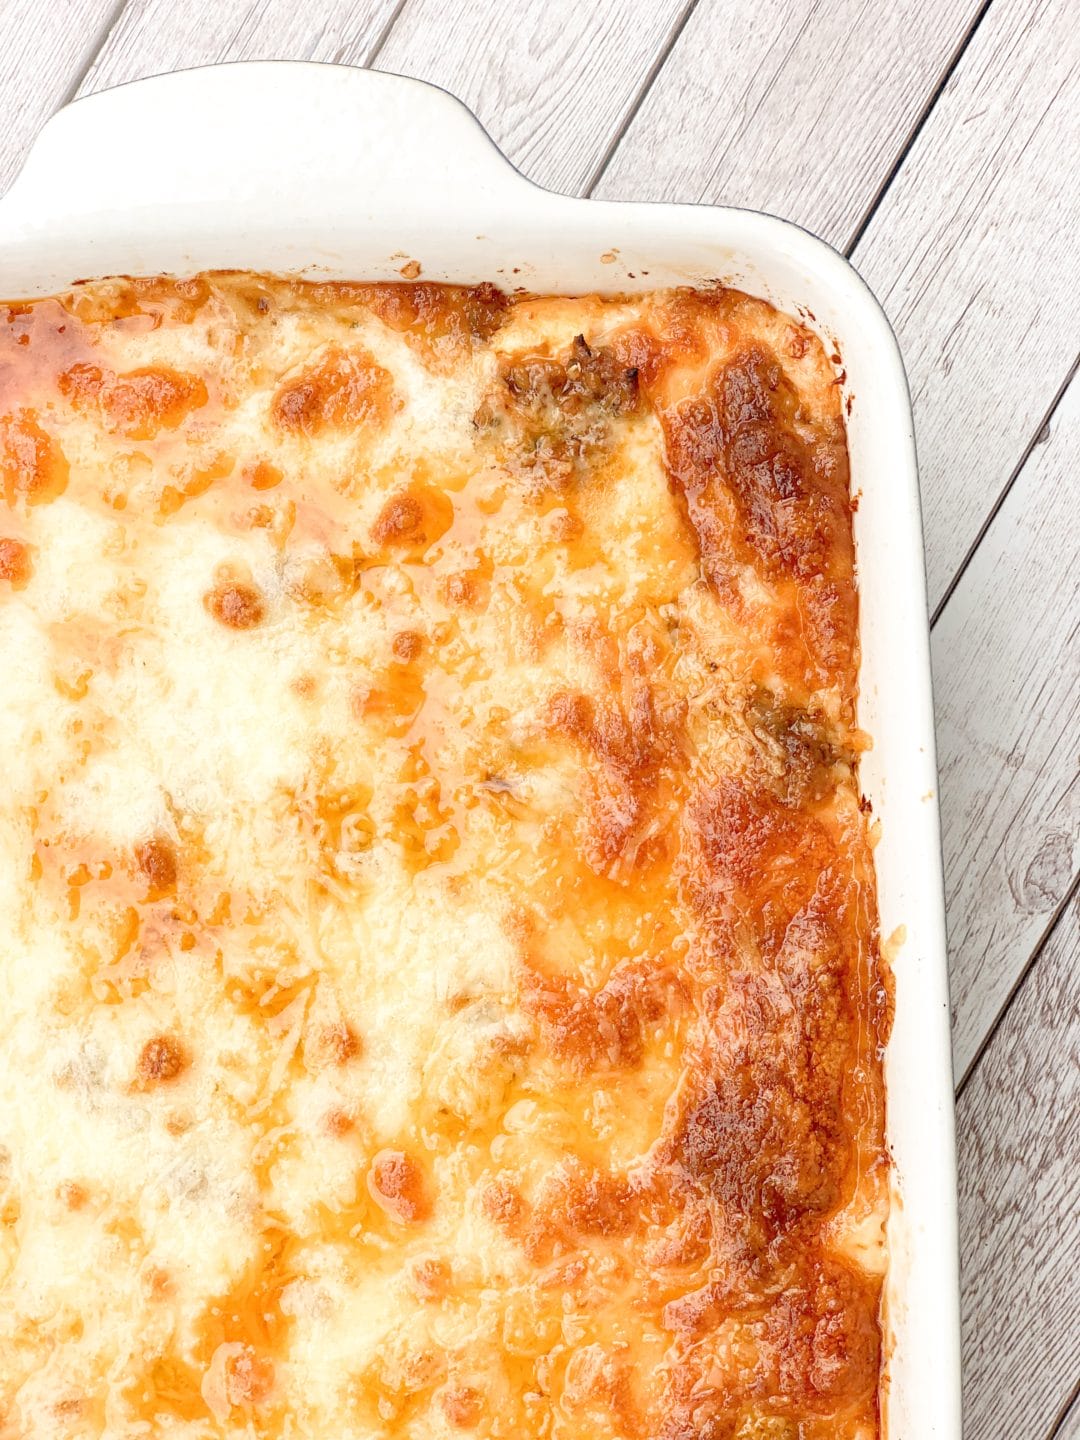 Easy keto lasagna in 30 minutes from the scratch - Family On Keto